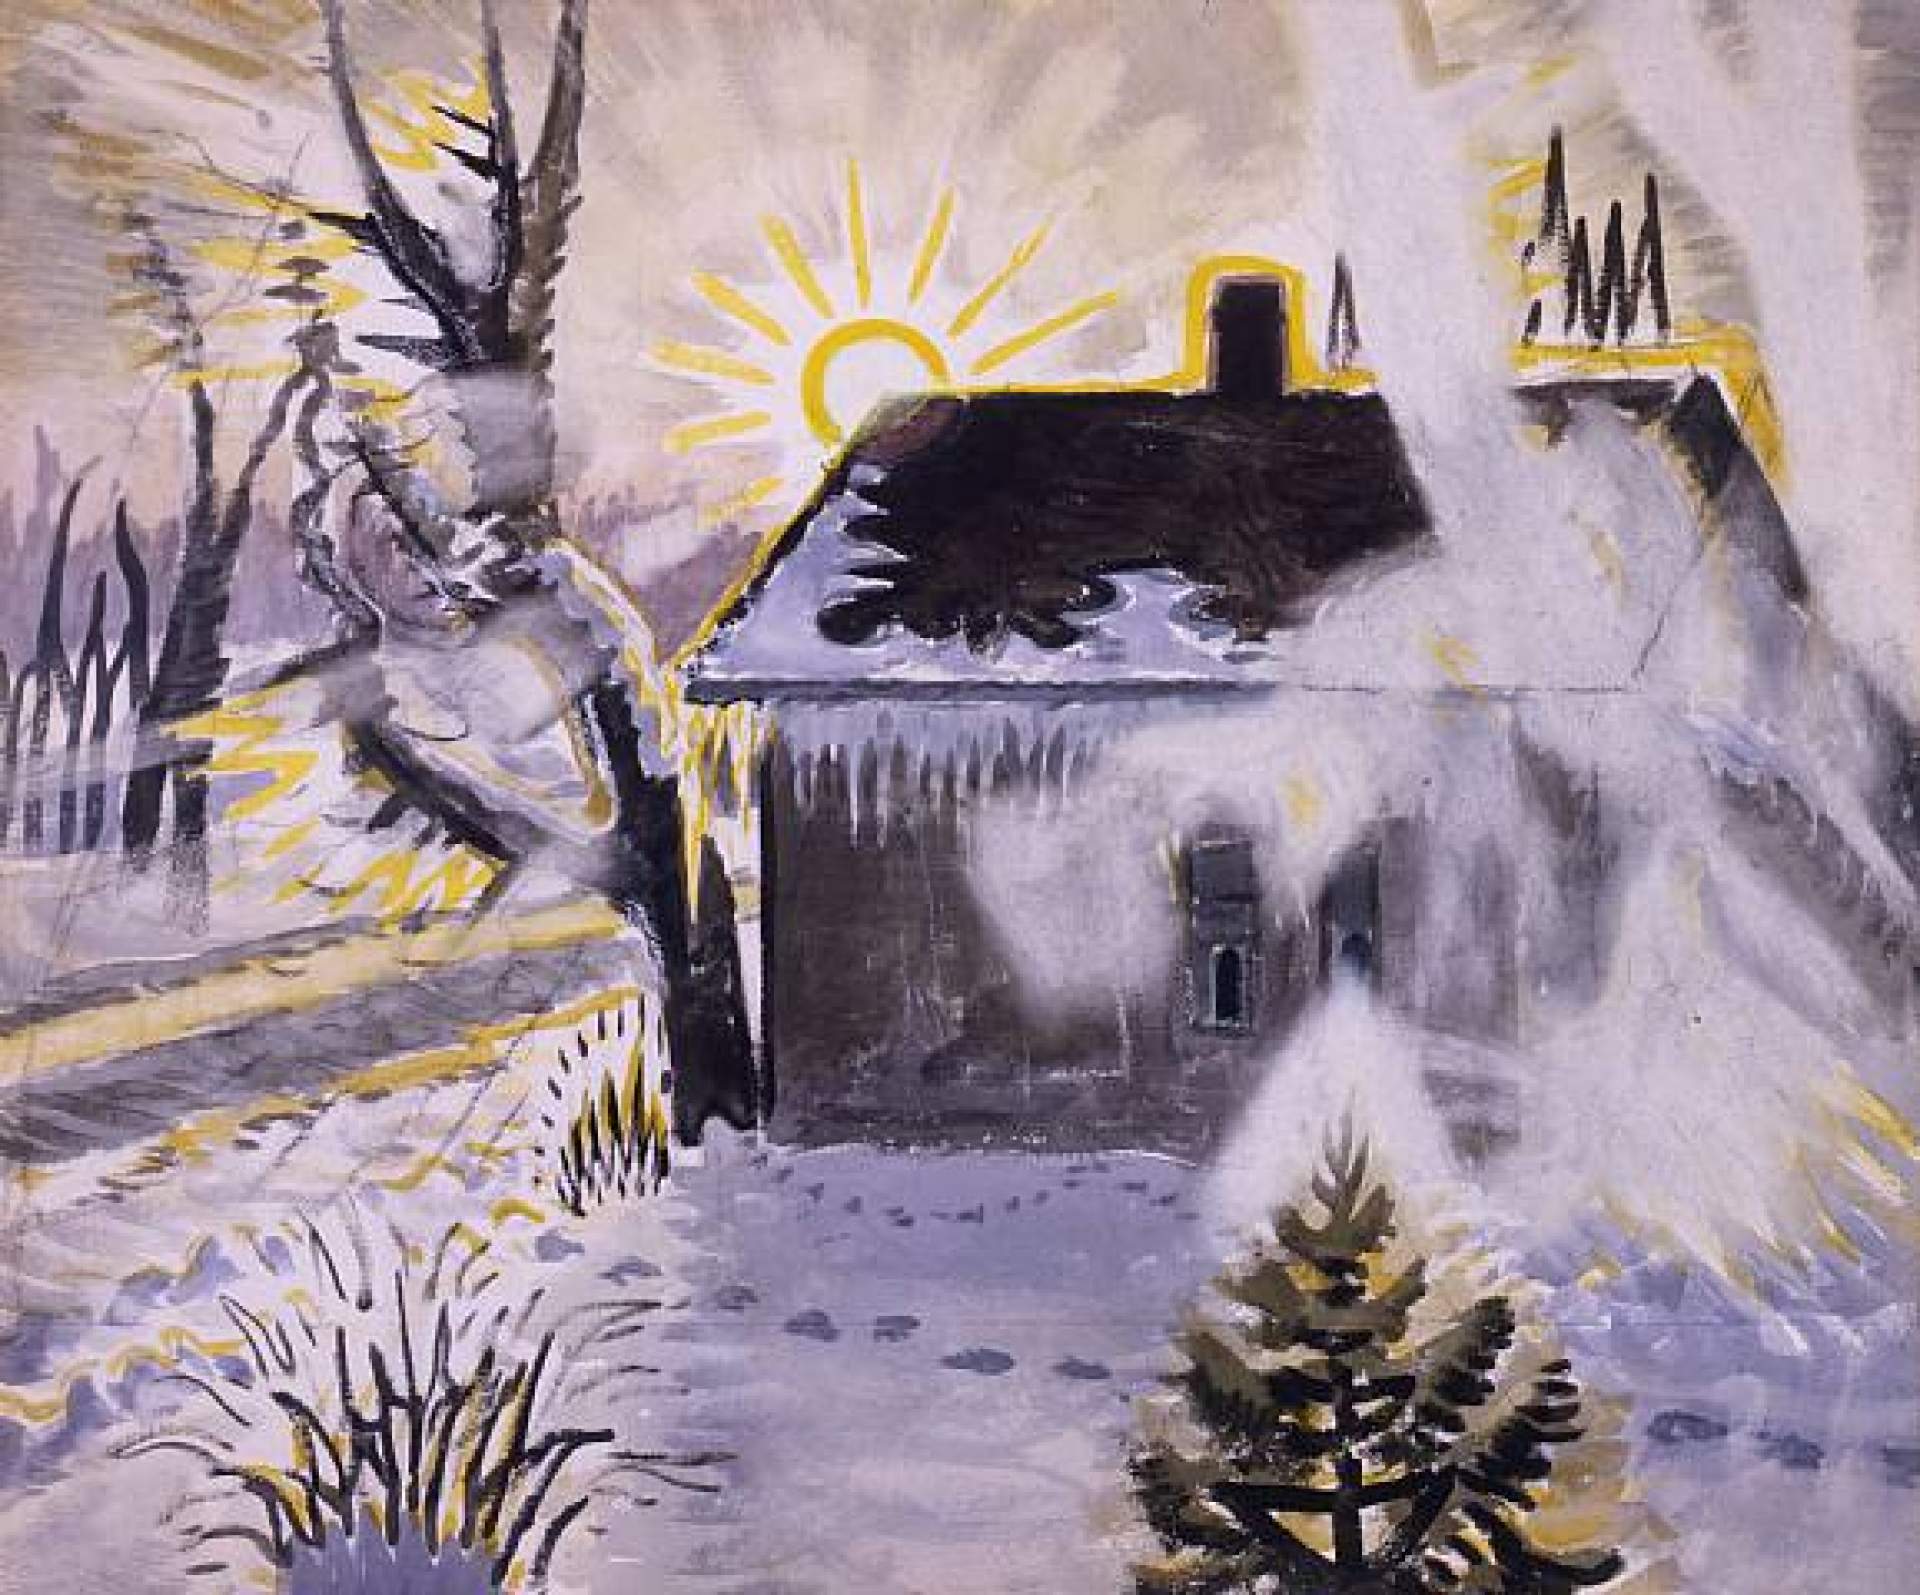 Why we exhibit unfinished works by Charles E. Burchfield